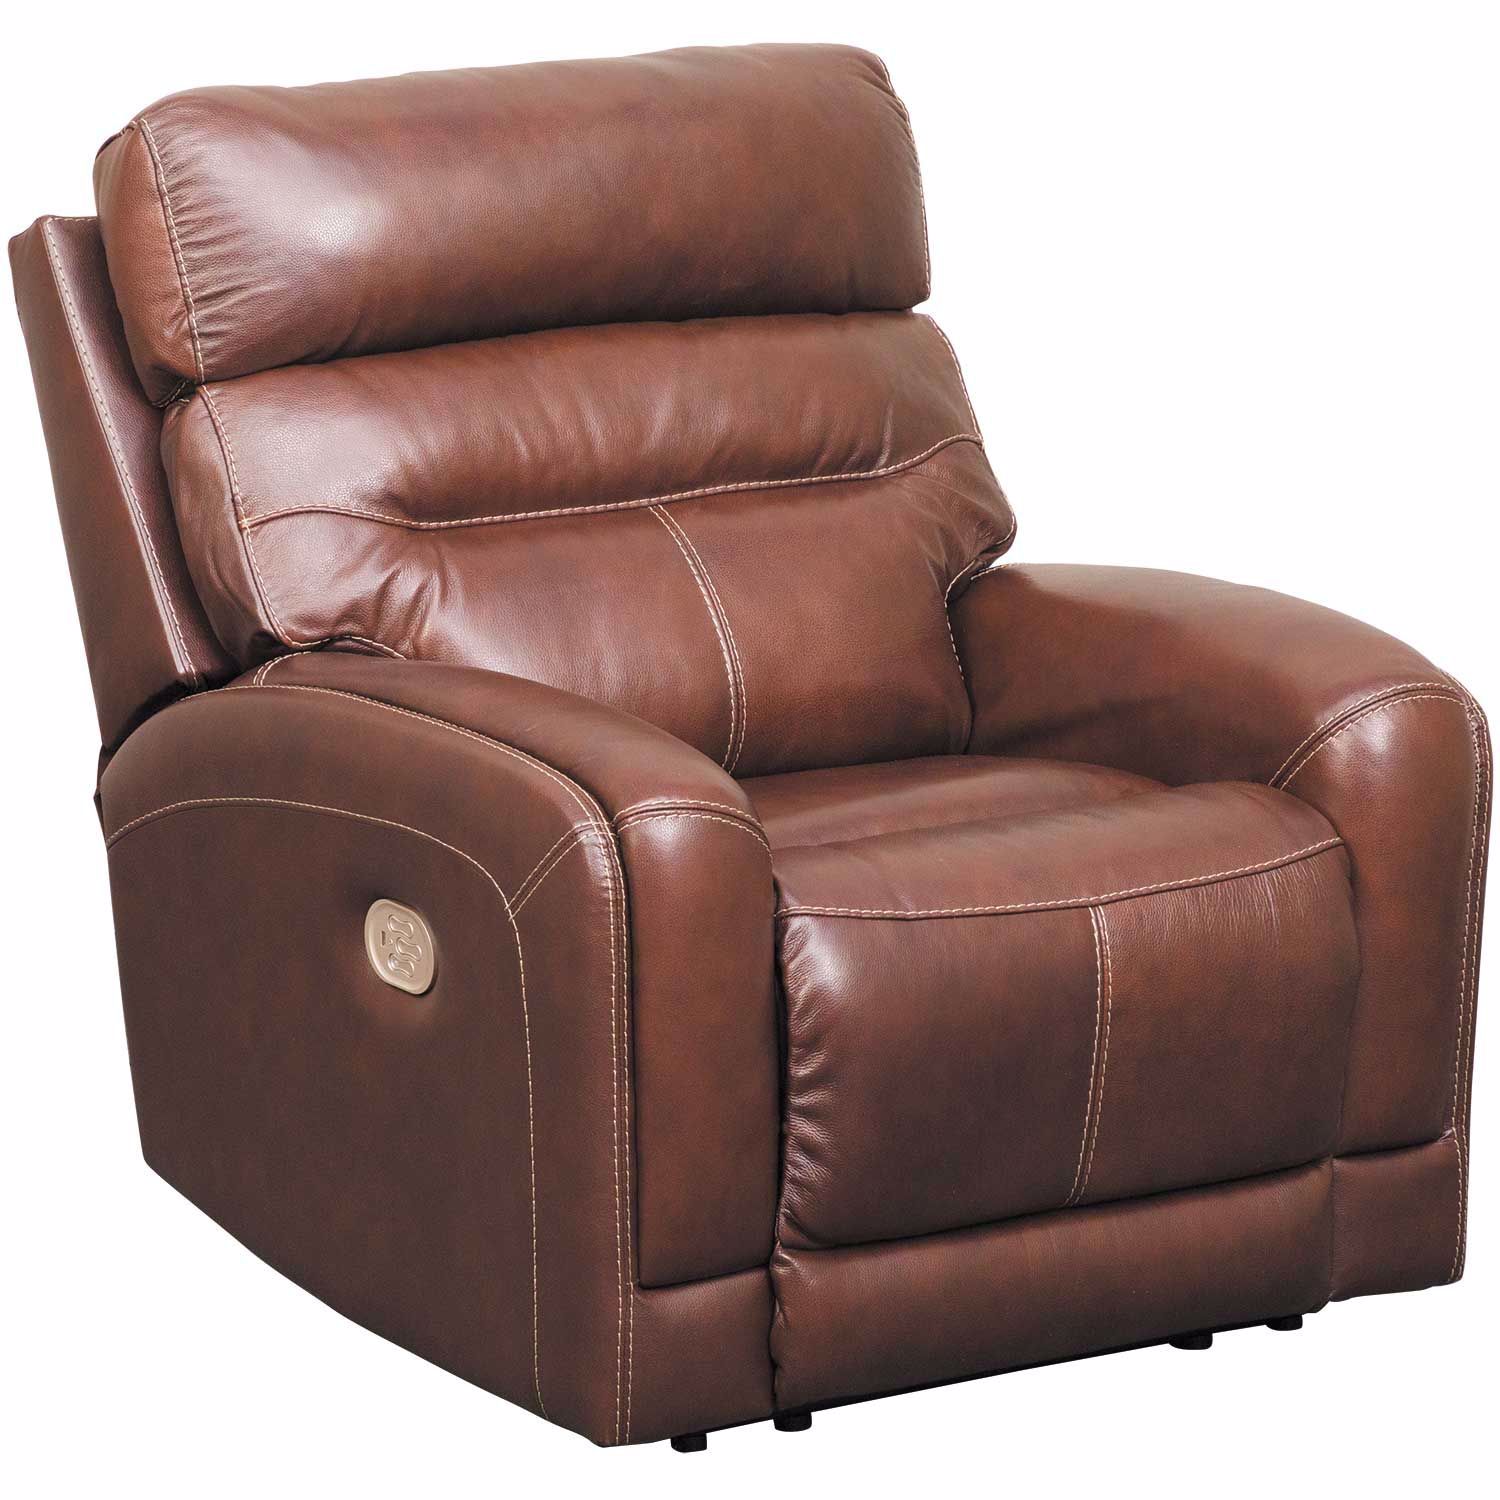 Sessom Leather Power Recliner With Adjustable Headrest And Lumbar